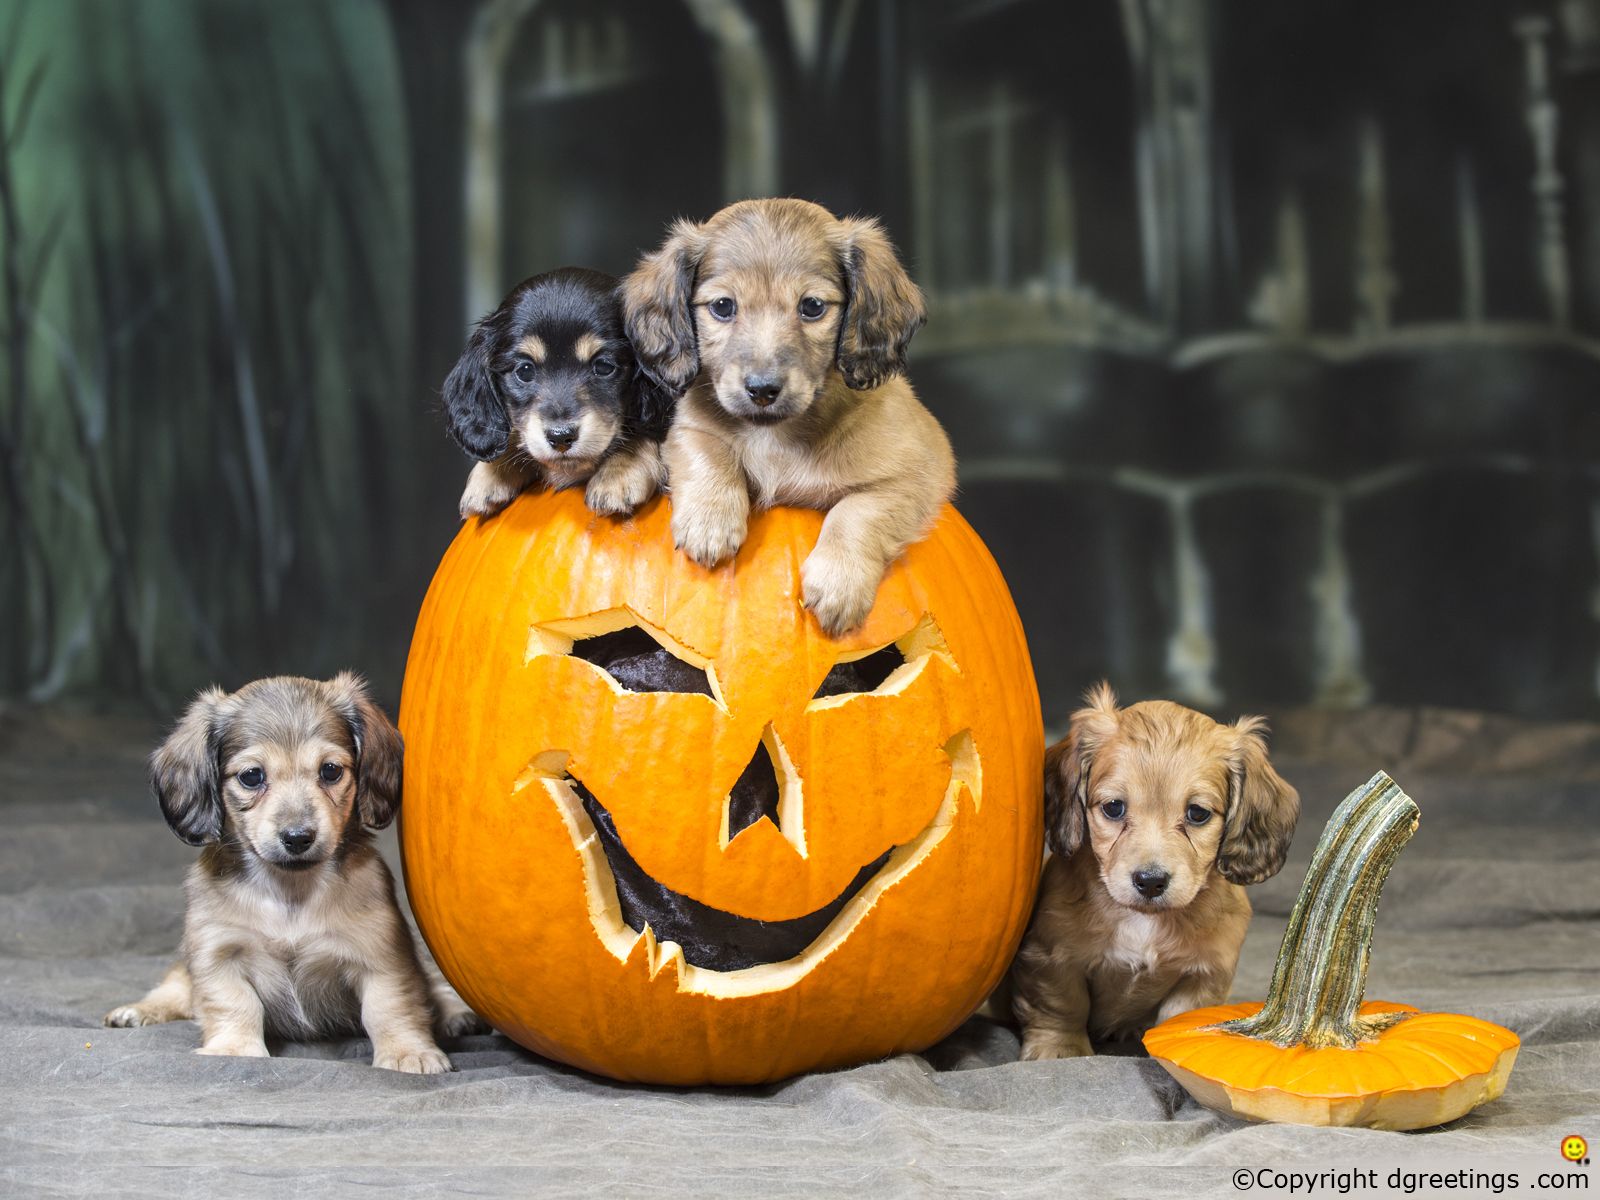 Halloween can be scary for pups warns dog whisperers